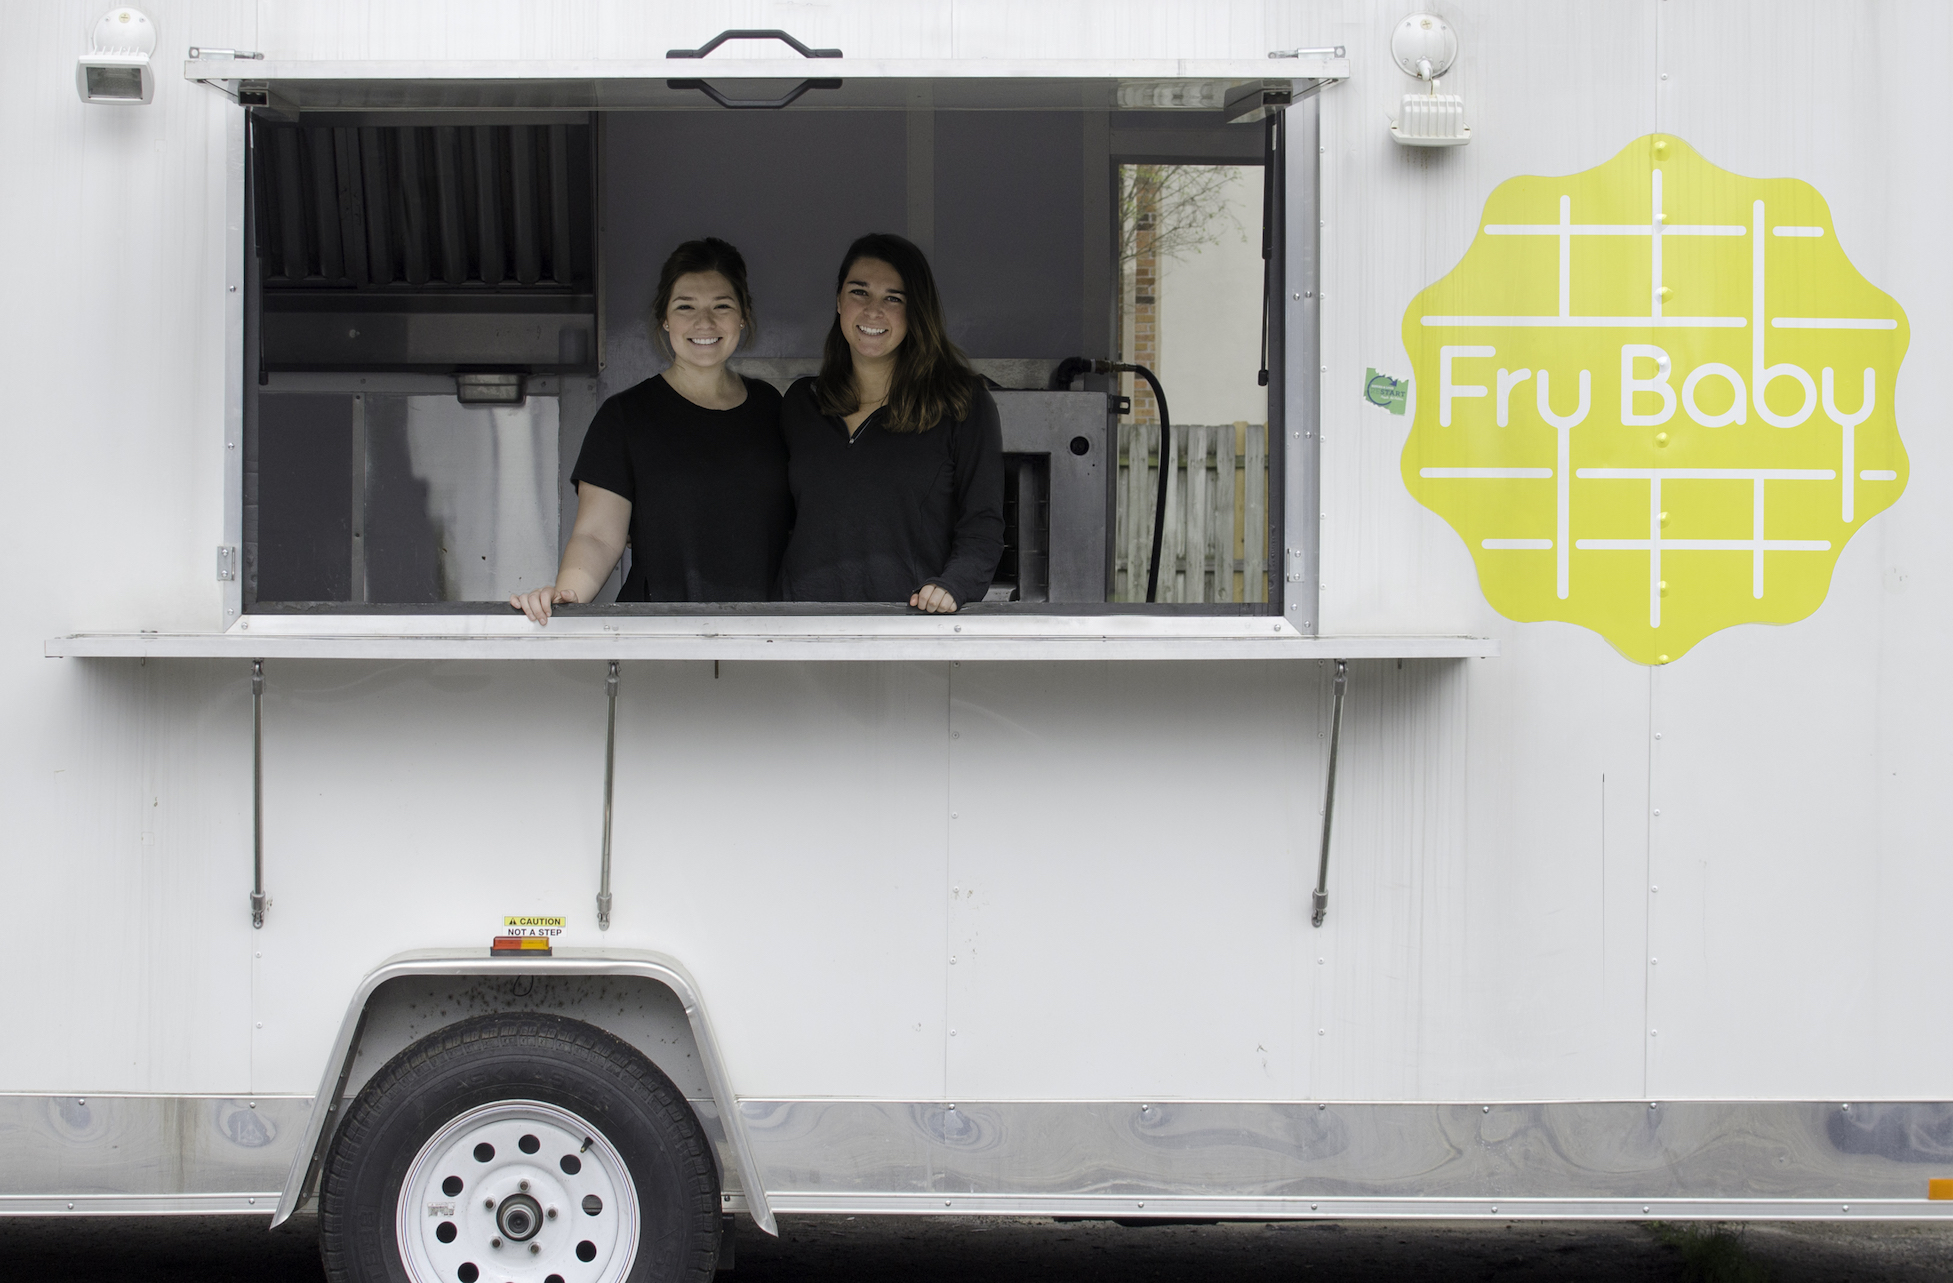 FryBaby food truck serves late-night waffle fries - [225]